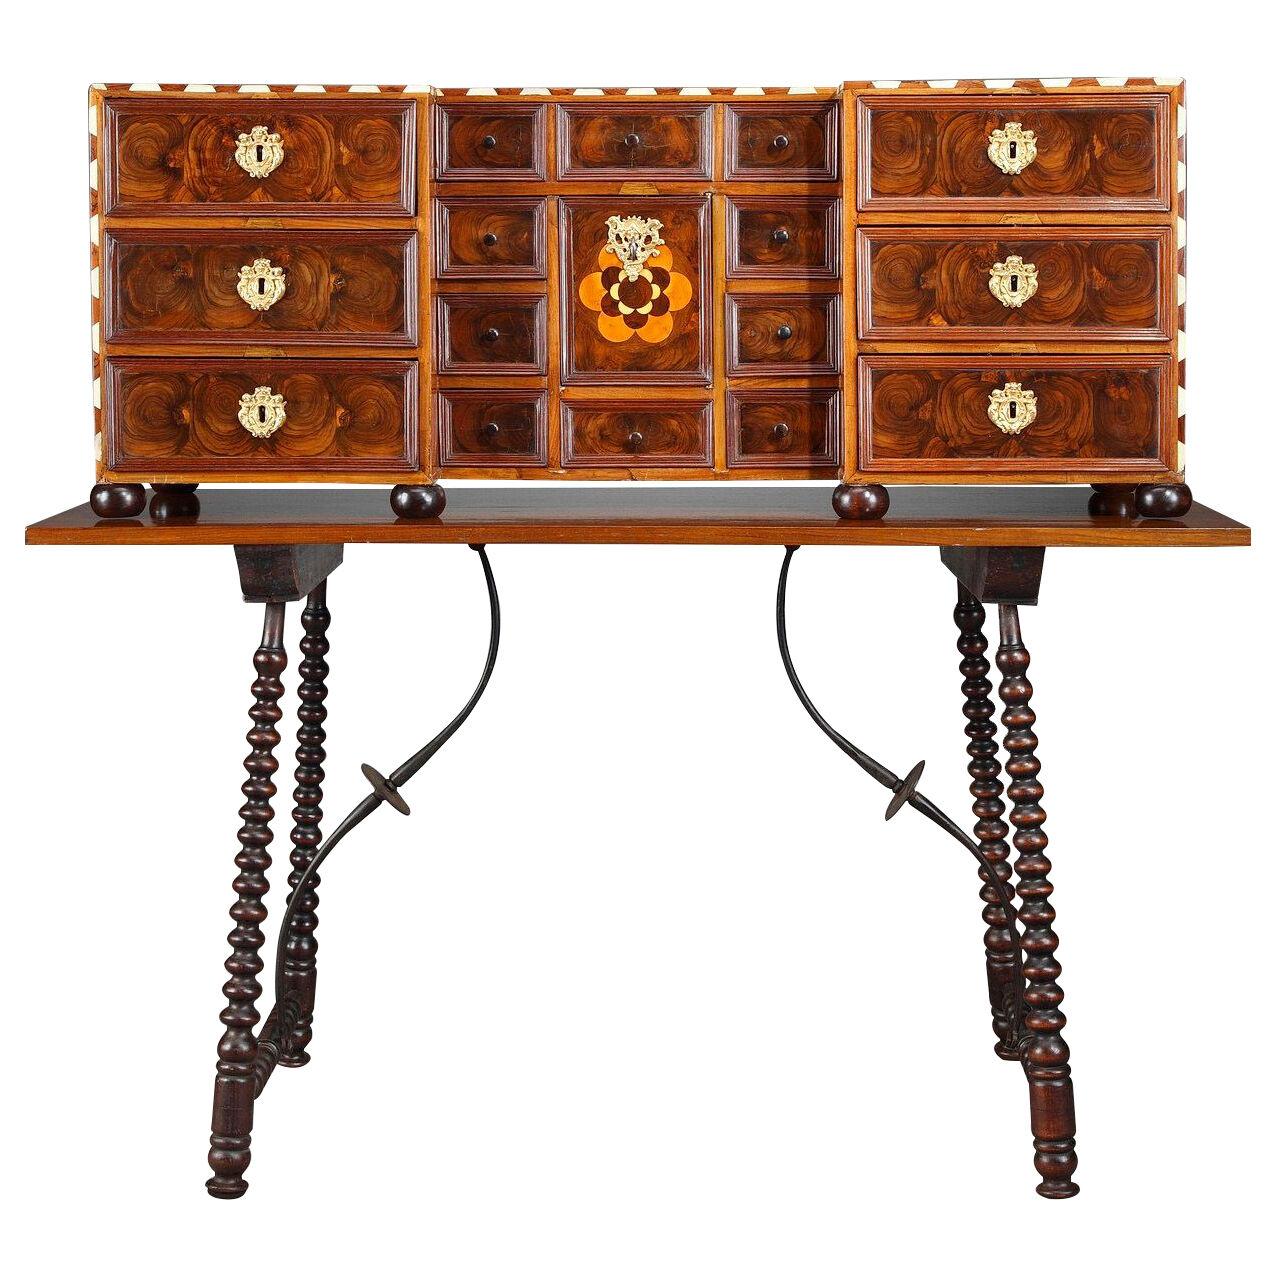 Early 18th Century Walnut and Amaranth Marquetry German Cabinet